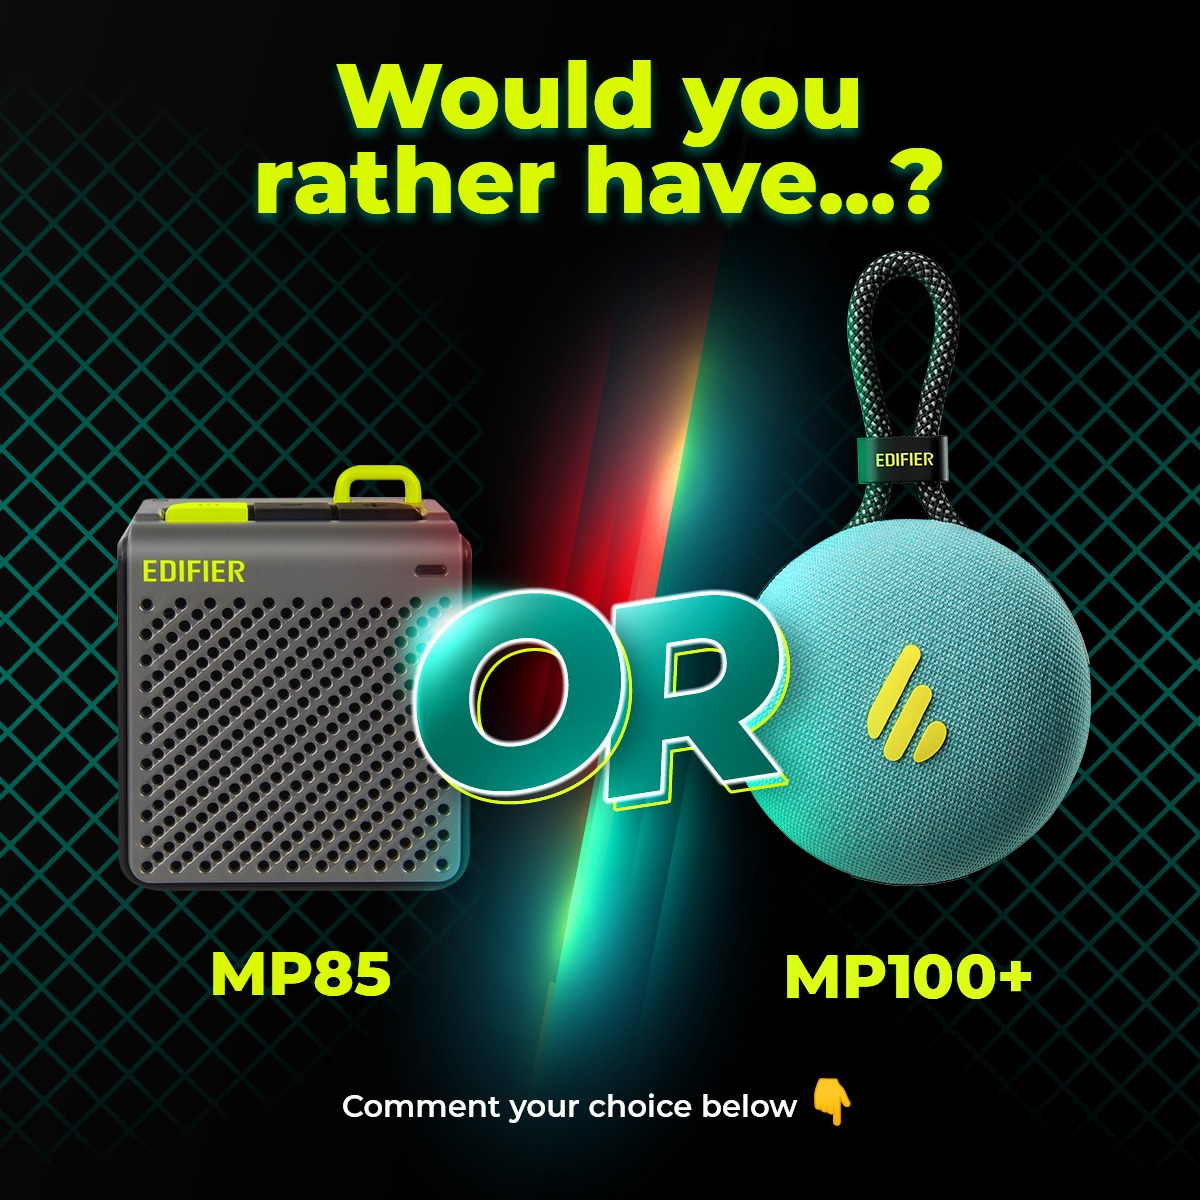 Our best-seller portable speakers - MP85, the mini music box, and MP100, your waterproof go-to companion. Which one is your pick - MP85 or MP100? Reply with your pick 👇 #Edifiermp85 #edifiermp100 #EdifierMalaysia #edifan #edifier #bluetoothspeaker #waterproof #waterproofspeaker